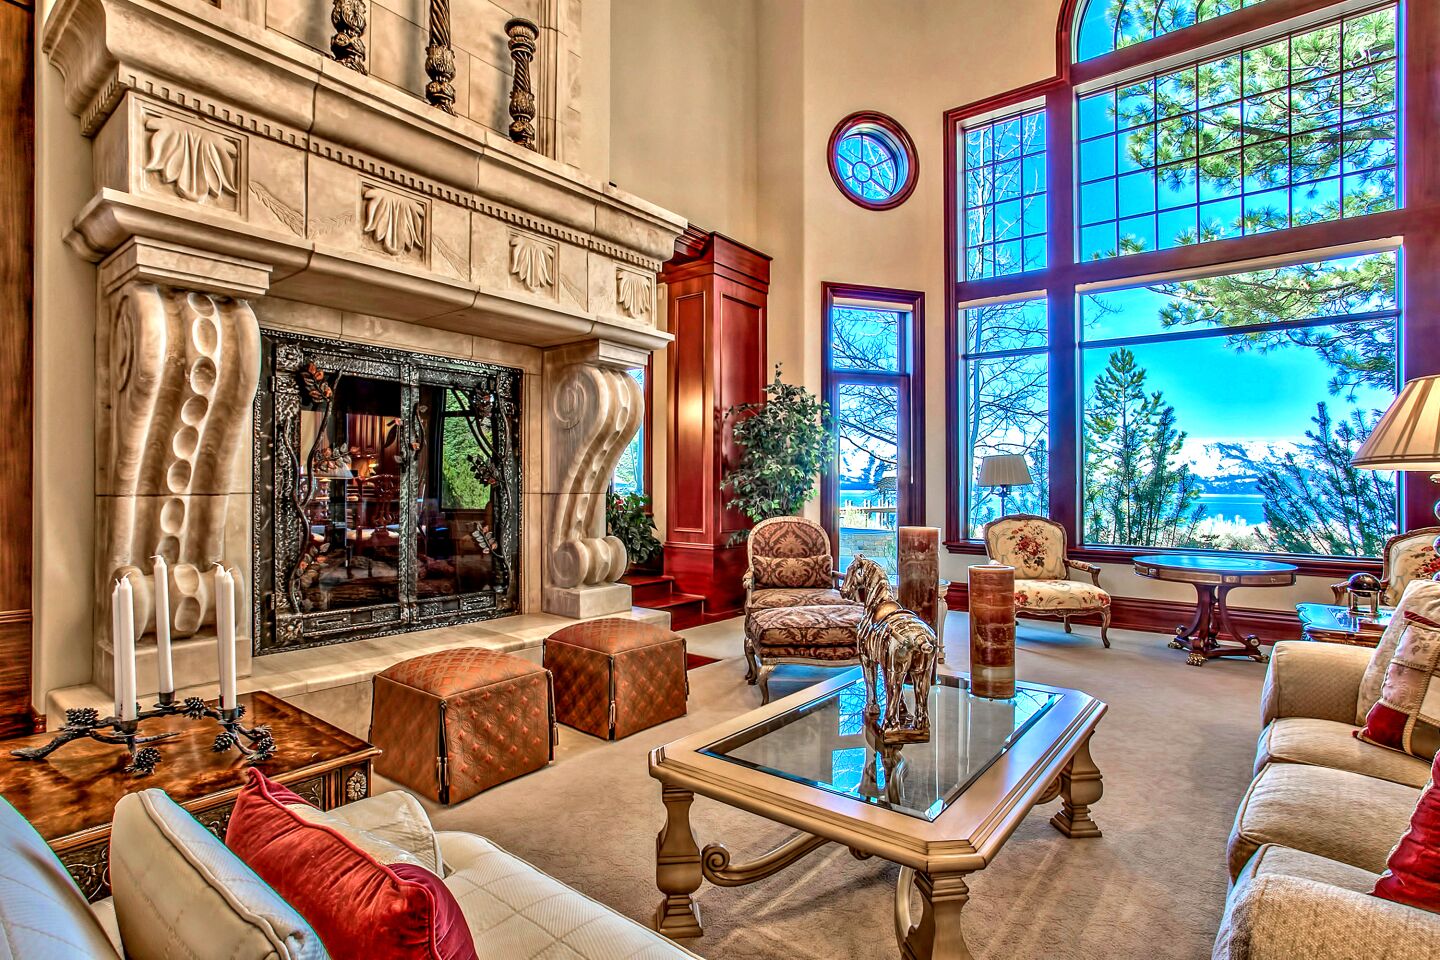 The interior of the home features a large, ornate fireplace and windows with views of Lake Tahoe